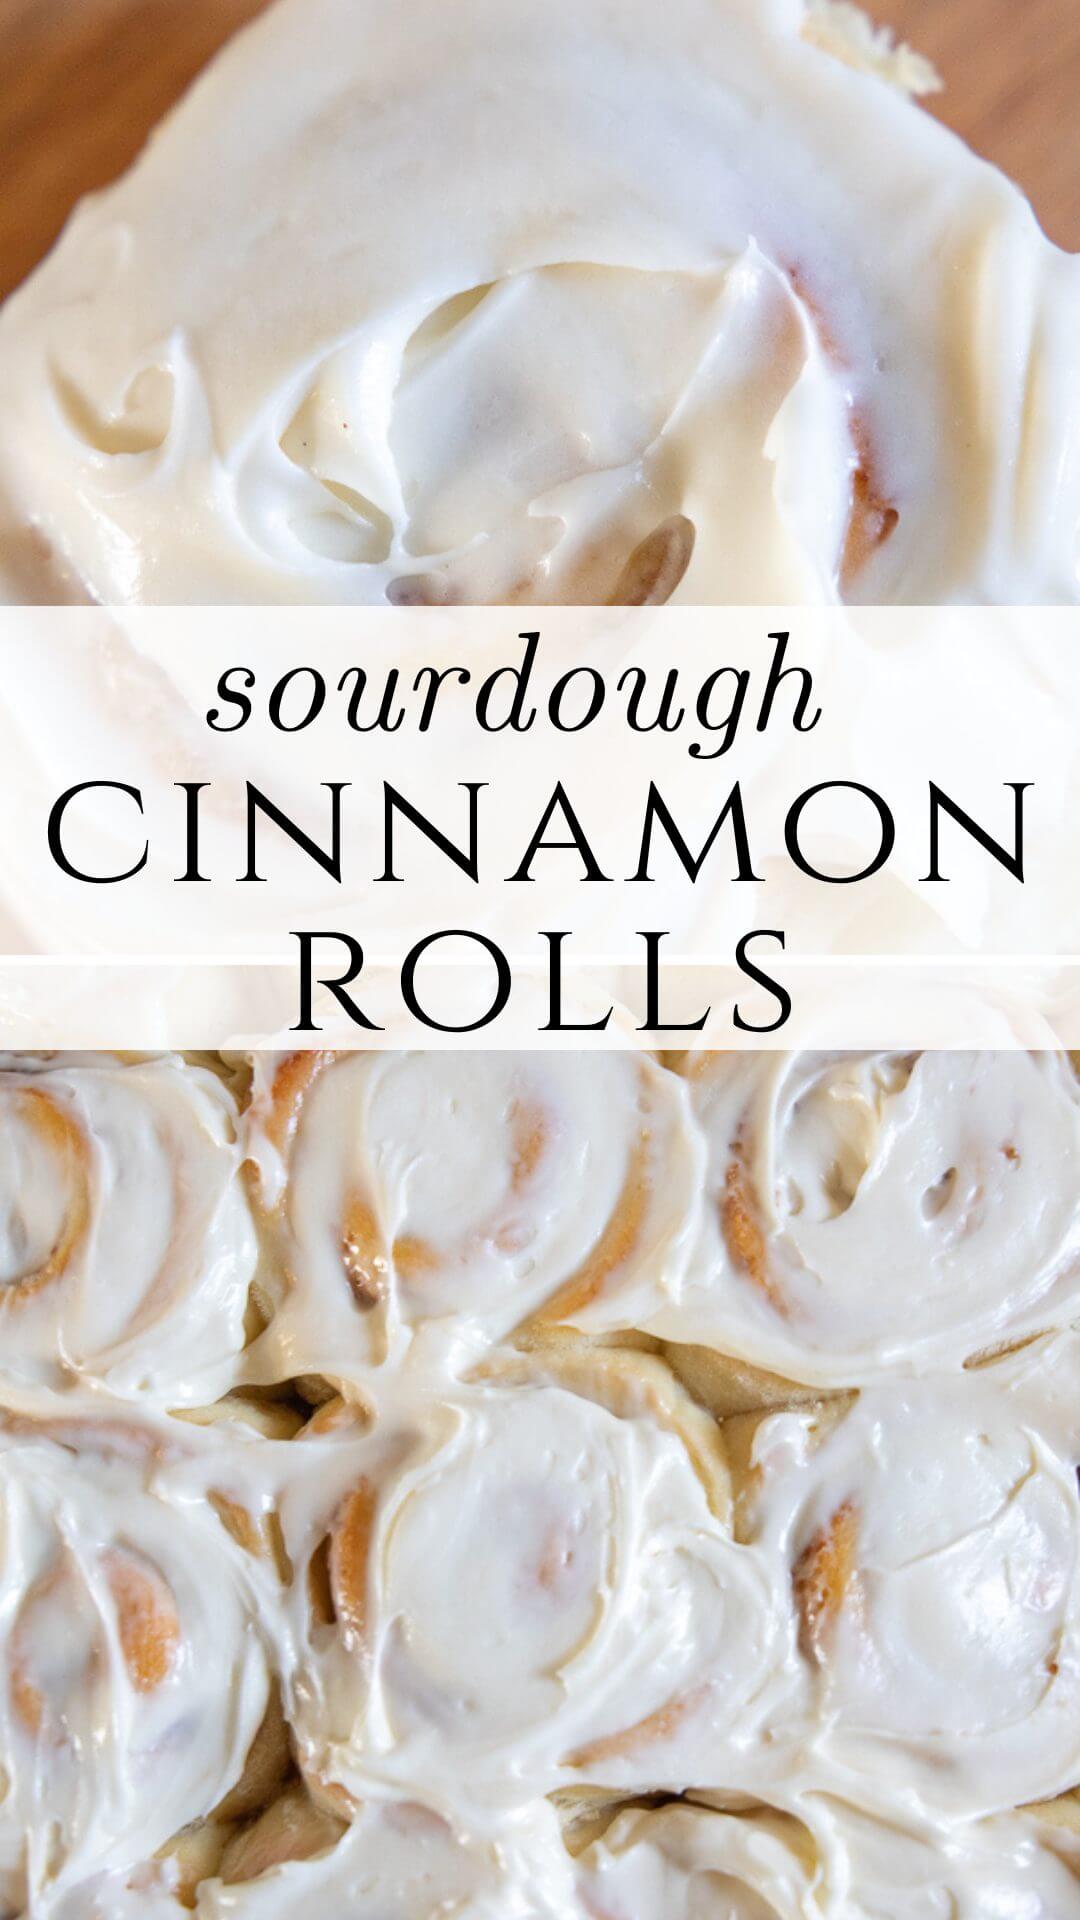 Oh my gosh these sourdough cinnamon rolls are amazing! They are light and fluffy and take less time to make than traditional sourdough breads. They are ooey, gooey, soft and fluffy. Pretty much the perfect treat. Topped with cream cheese frosting, these are amazing~